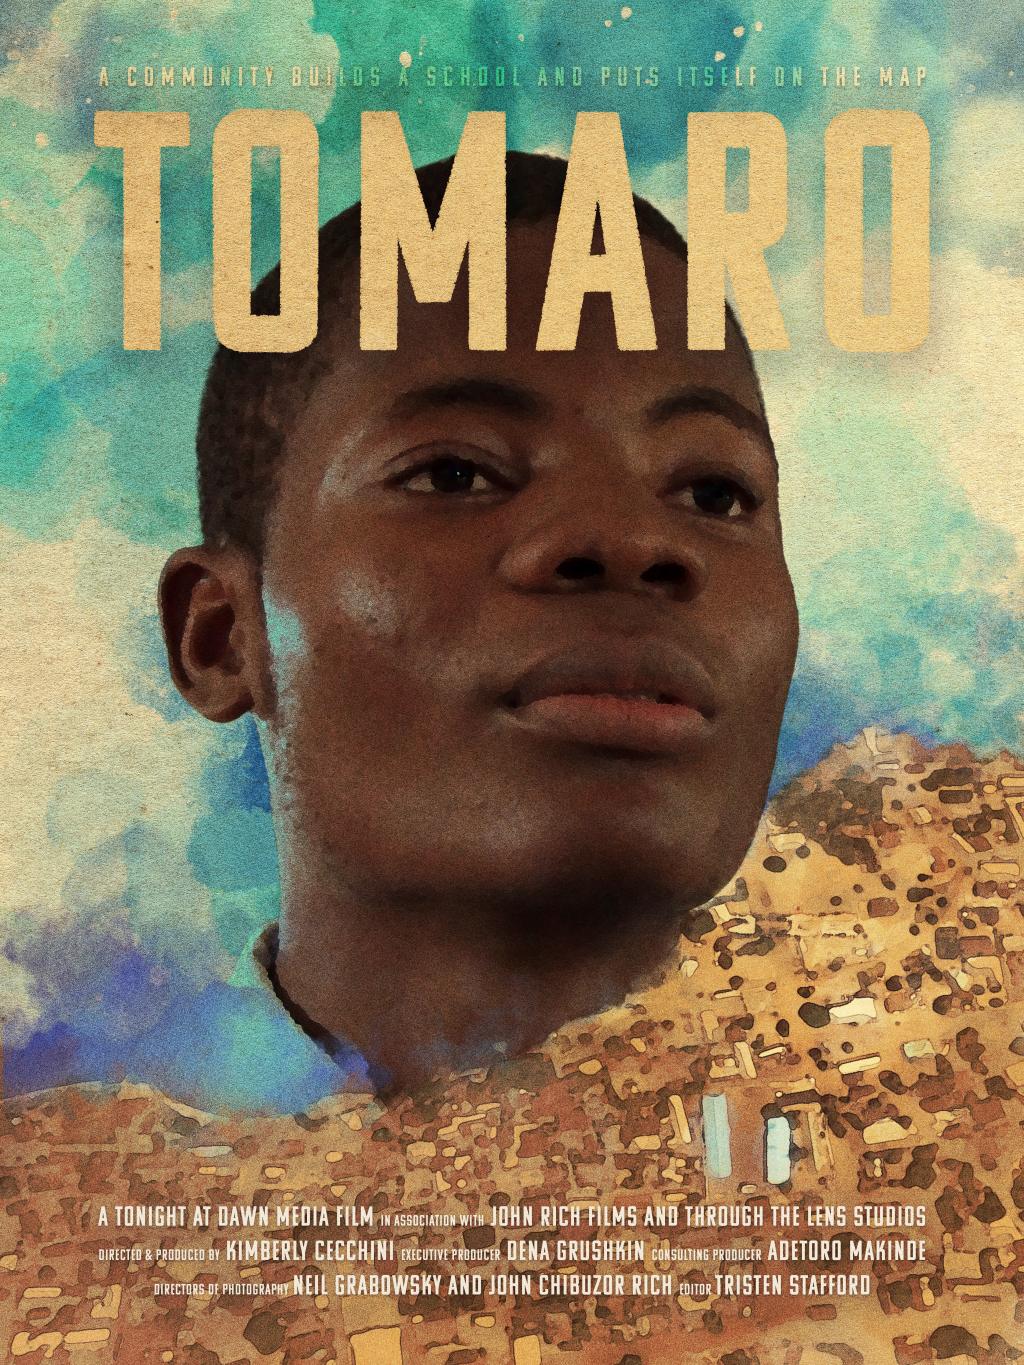 Tomaro is Headed to the BIG Screen